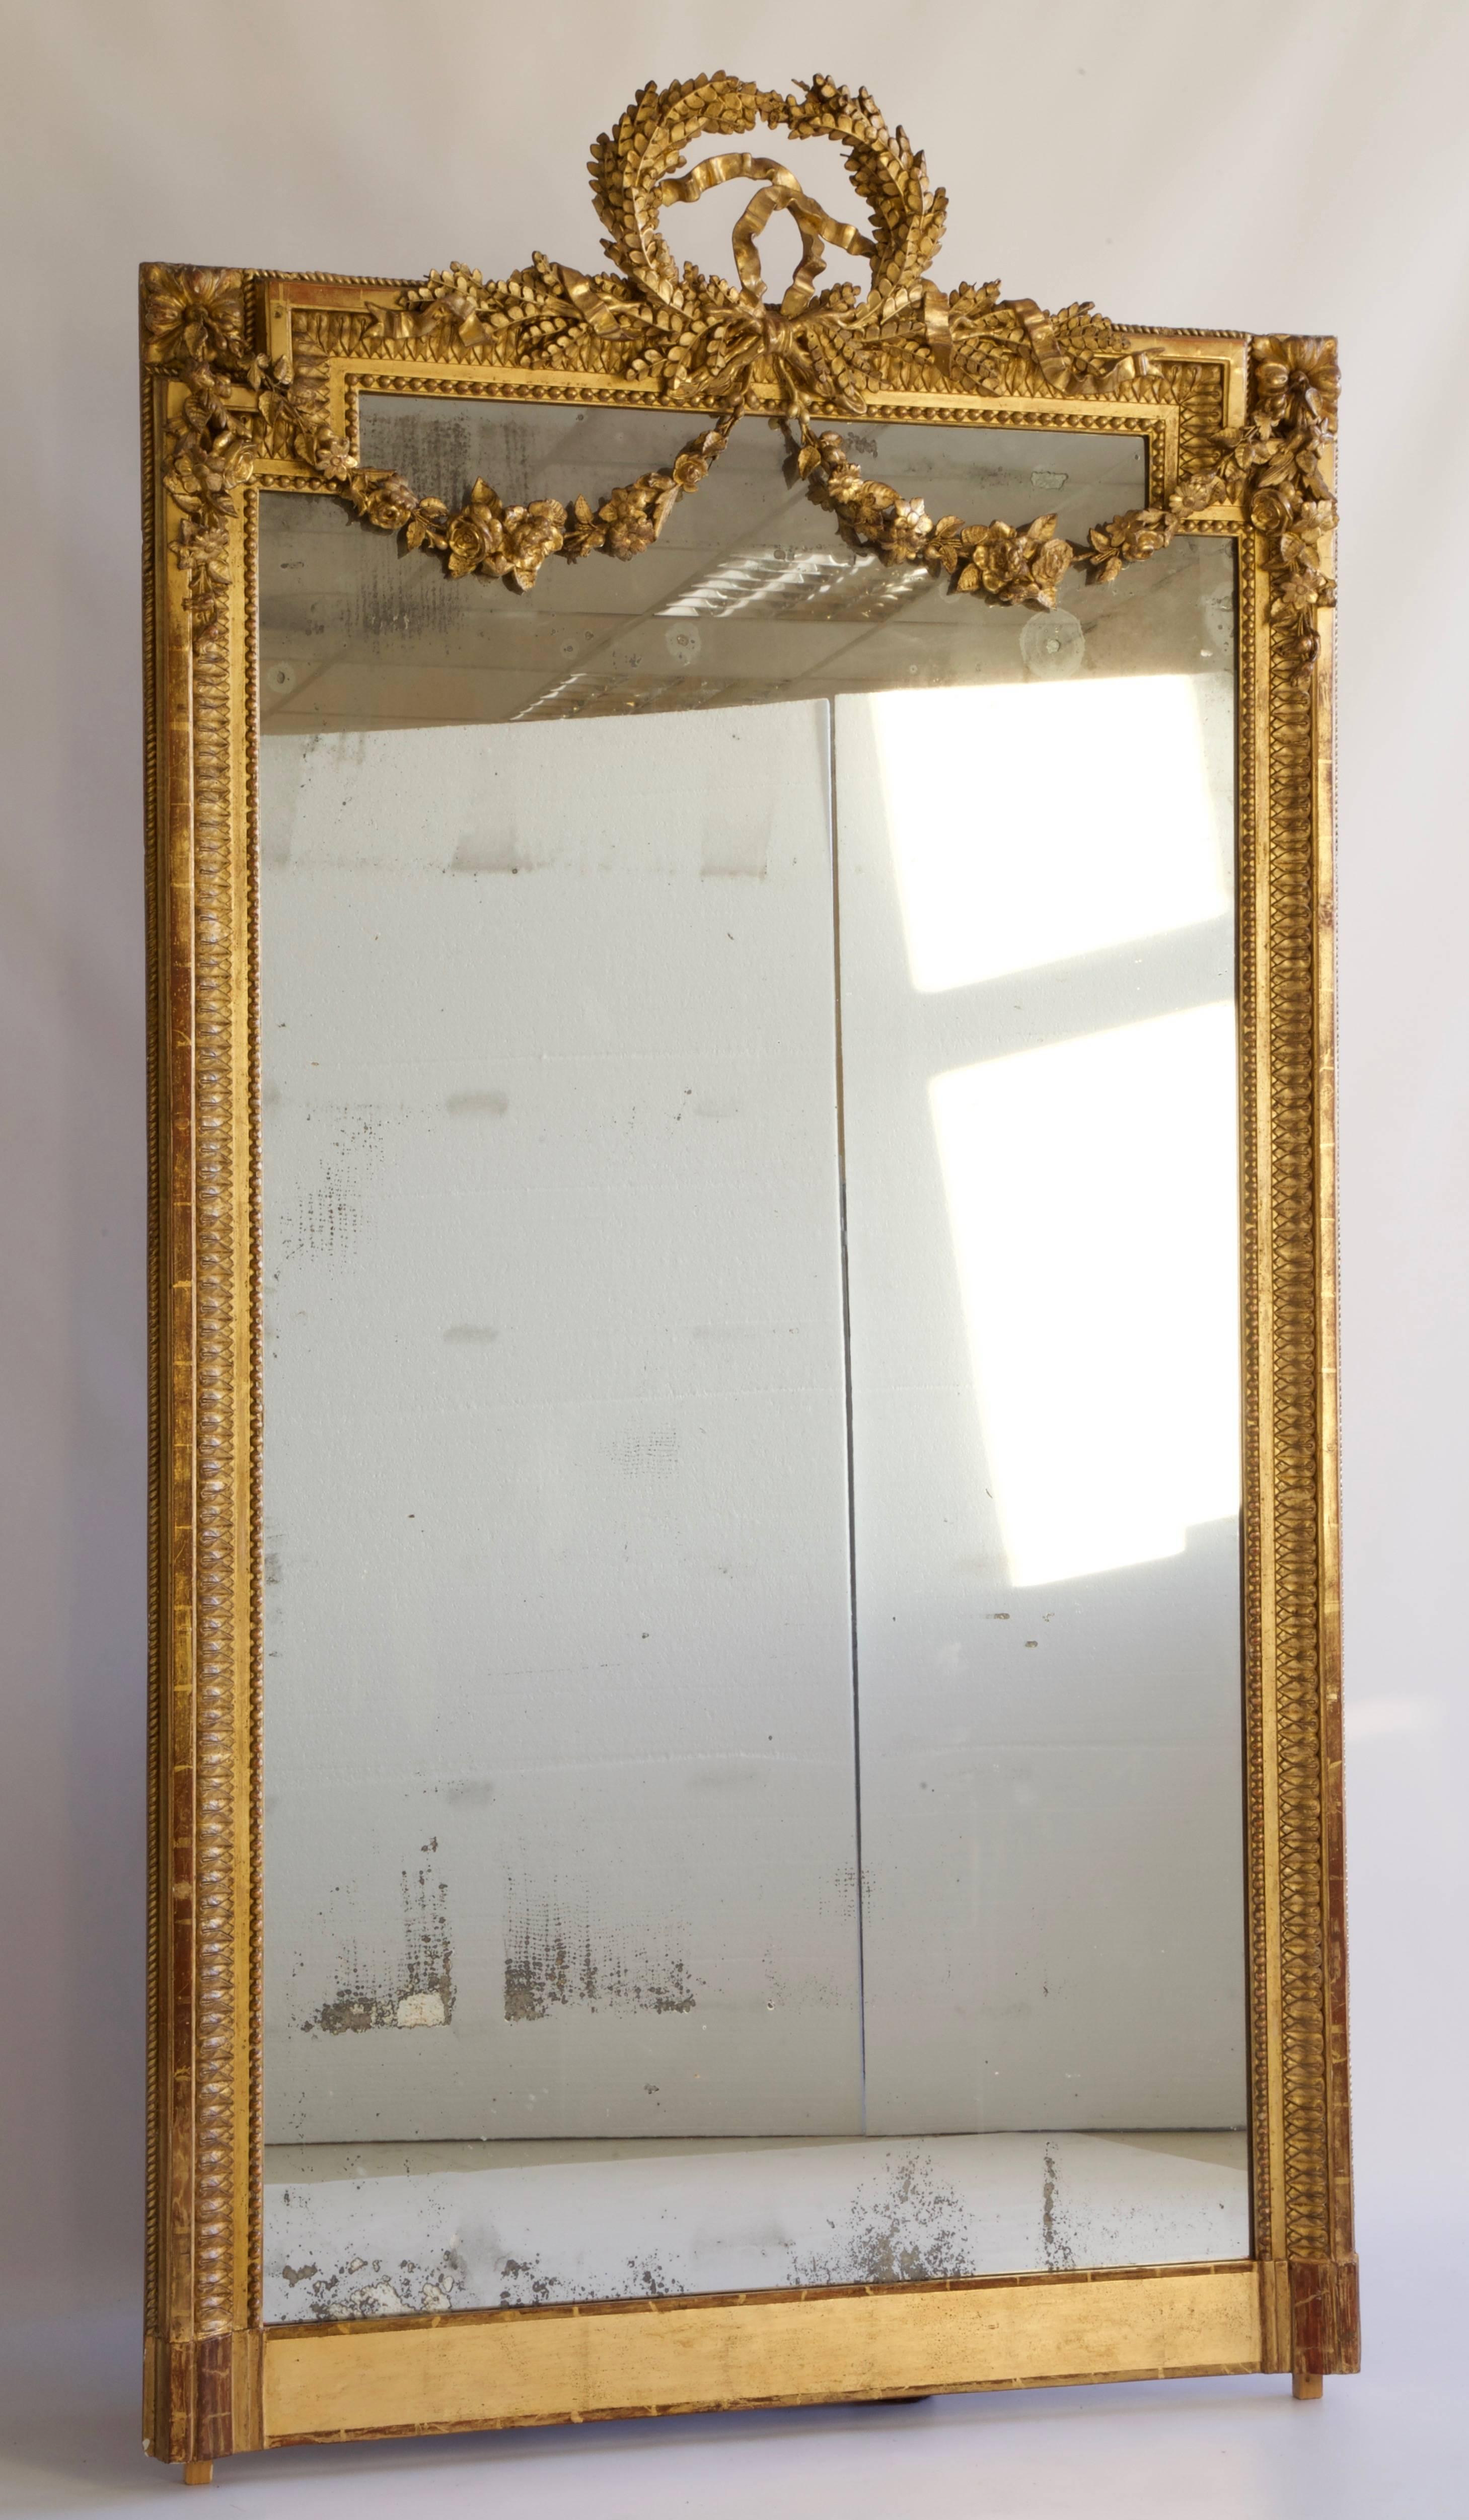 Large 19th century French Louis XVI style gold mirror.
With floral swags and a very fine ribbon.
Original Mercury Glass slightly picked in places.
Can be used floor standing as full length or hanged on a wall.